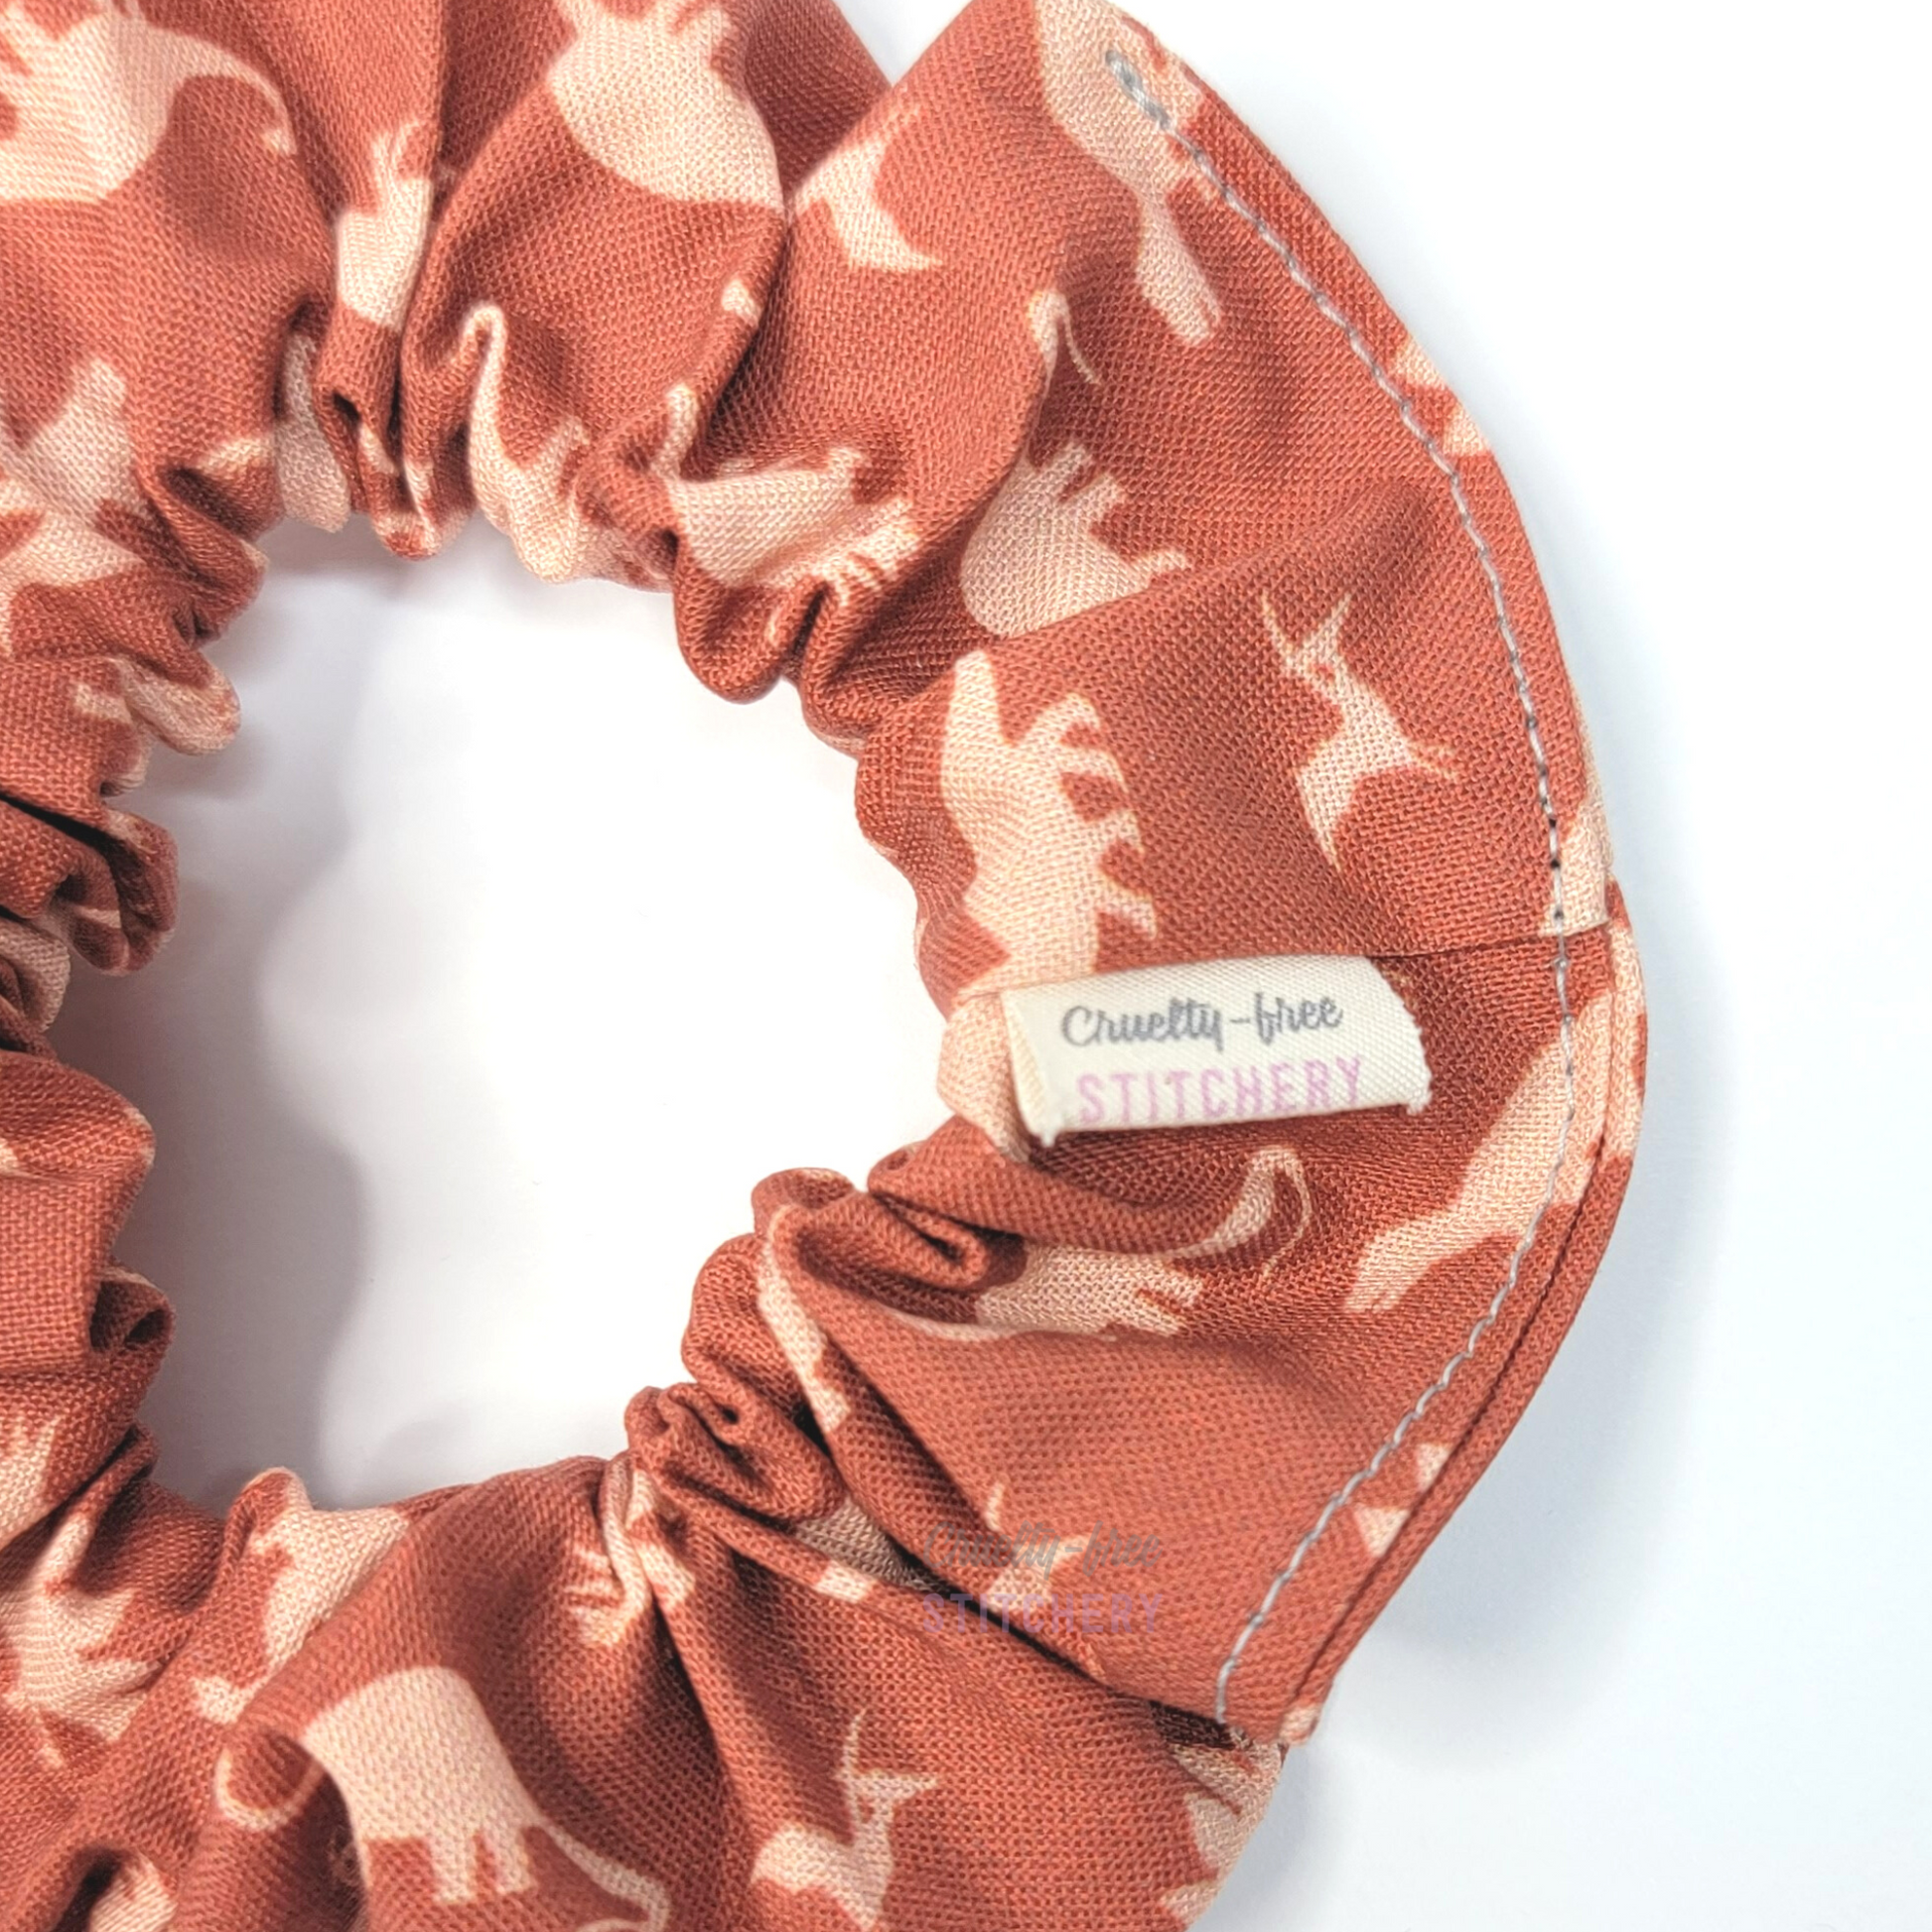 Close-up of the scrunchie with a small white tag with the Cruelty-Free Stitchery logo.